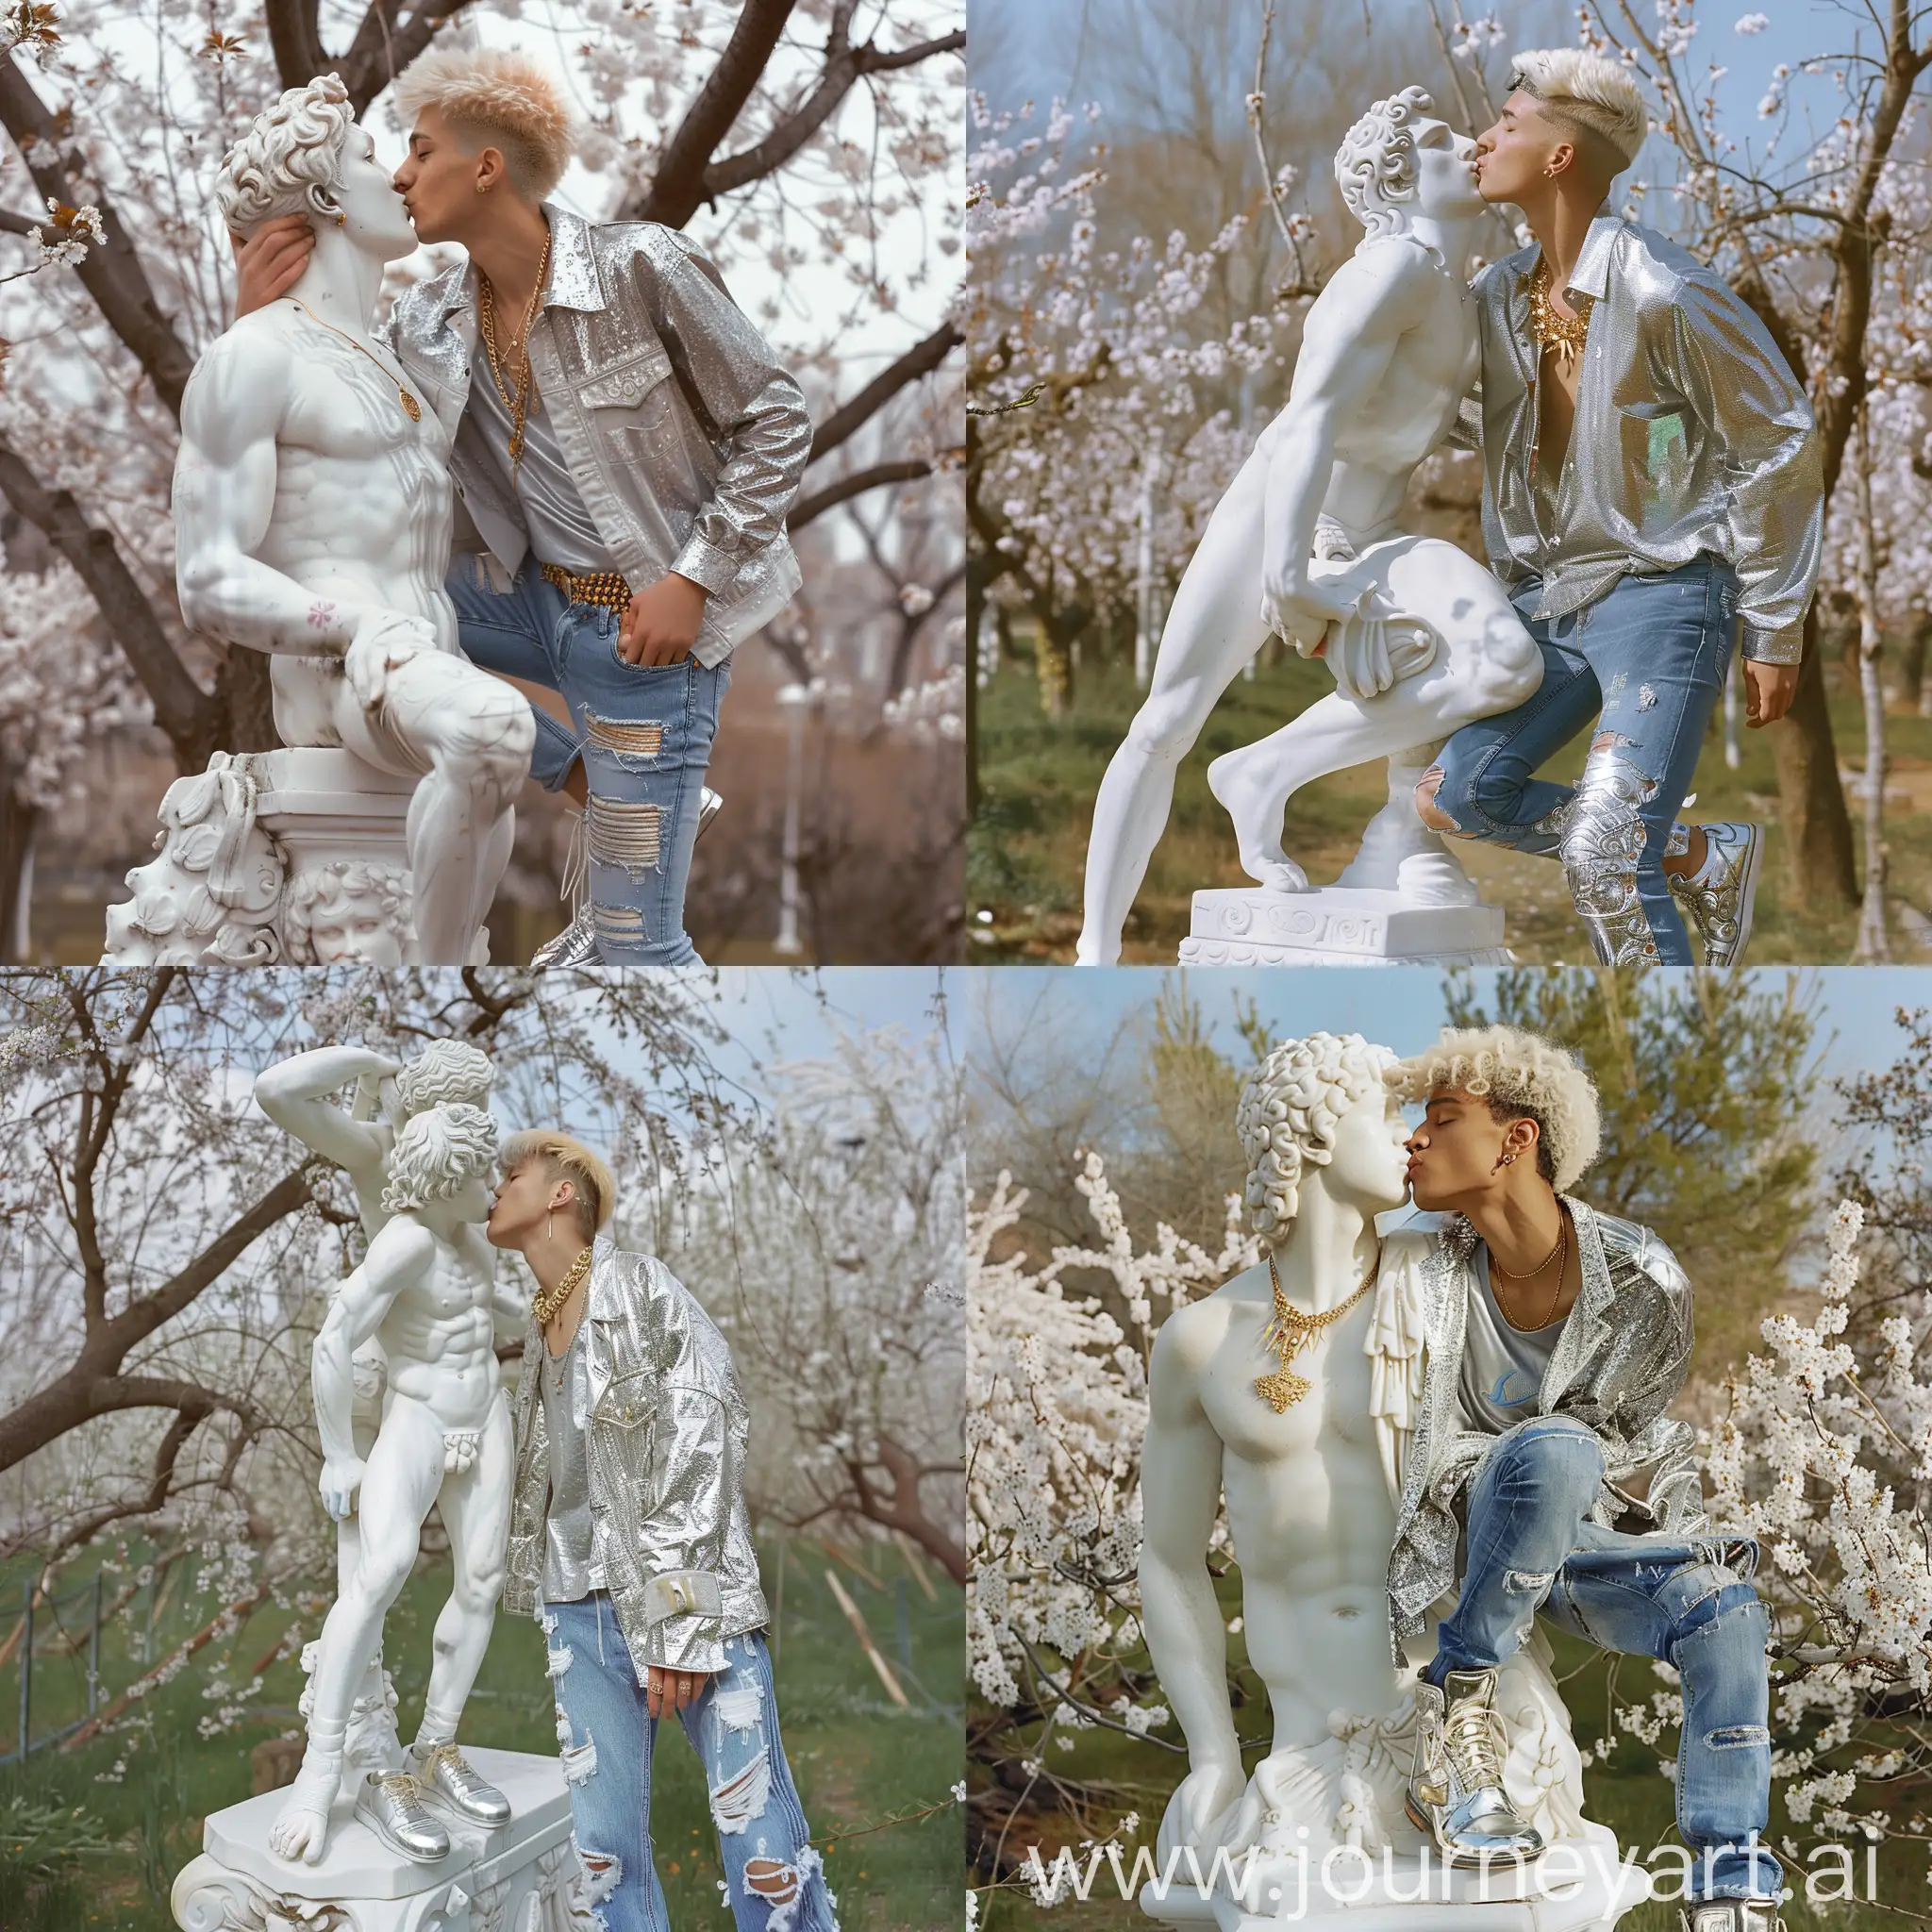 Young male, blond hair, silver shoes, skinny blue jeans, open silver shirt, golden necklace, kissing the white statue of a greek male hero, surrounded by blossom trees,